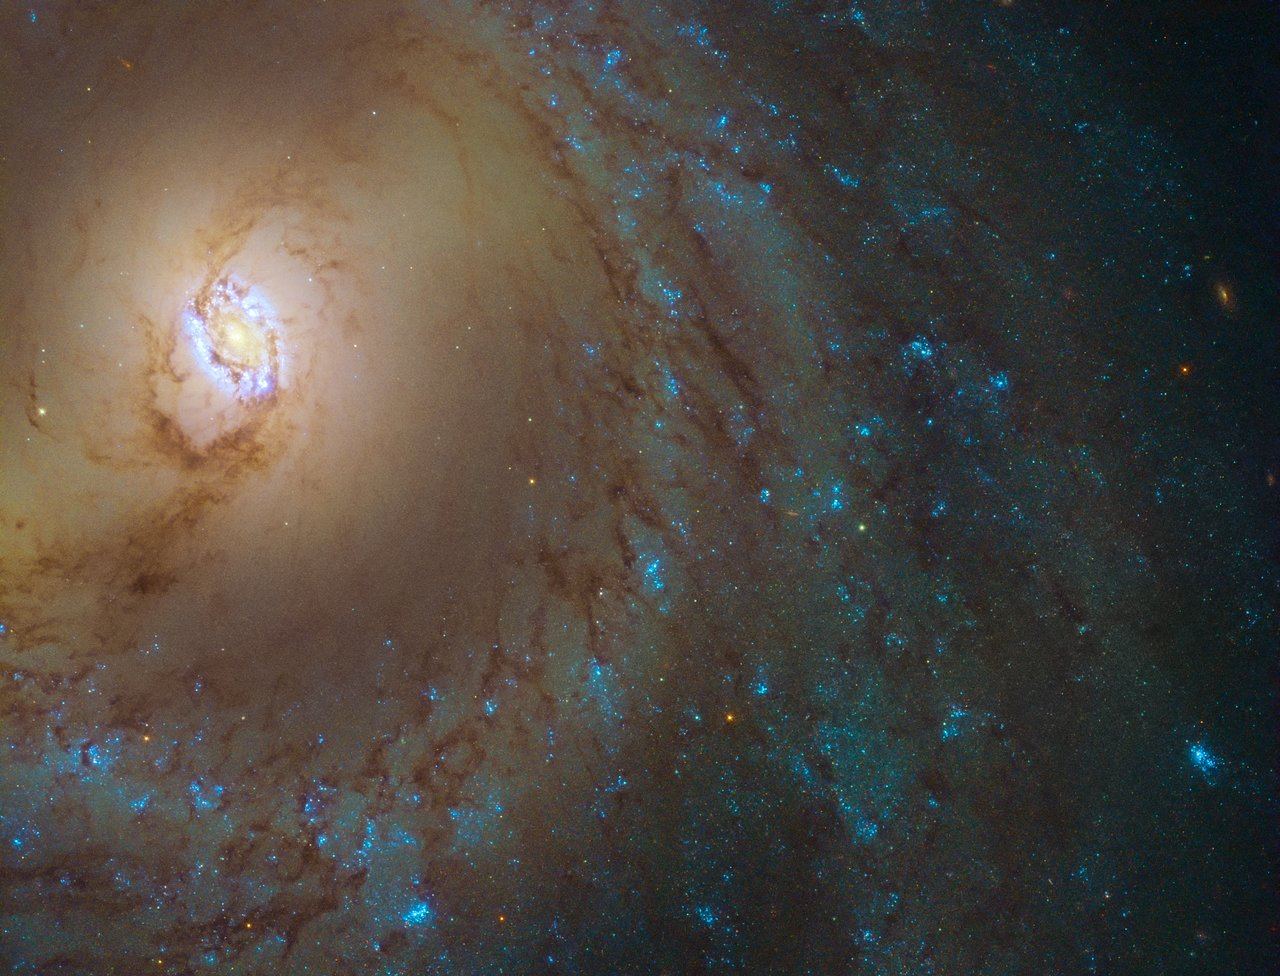 The Milky Way has an Inner Ring, Just Outside the Core